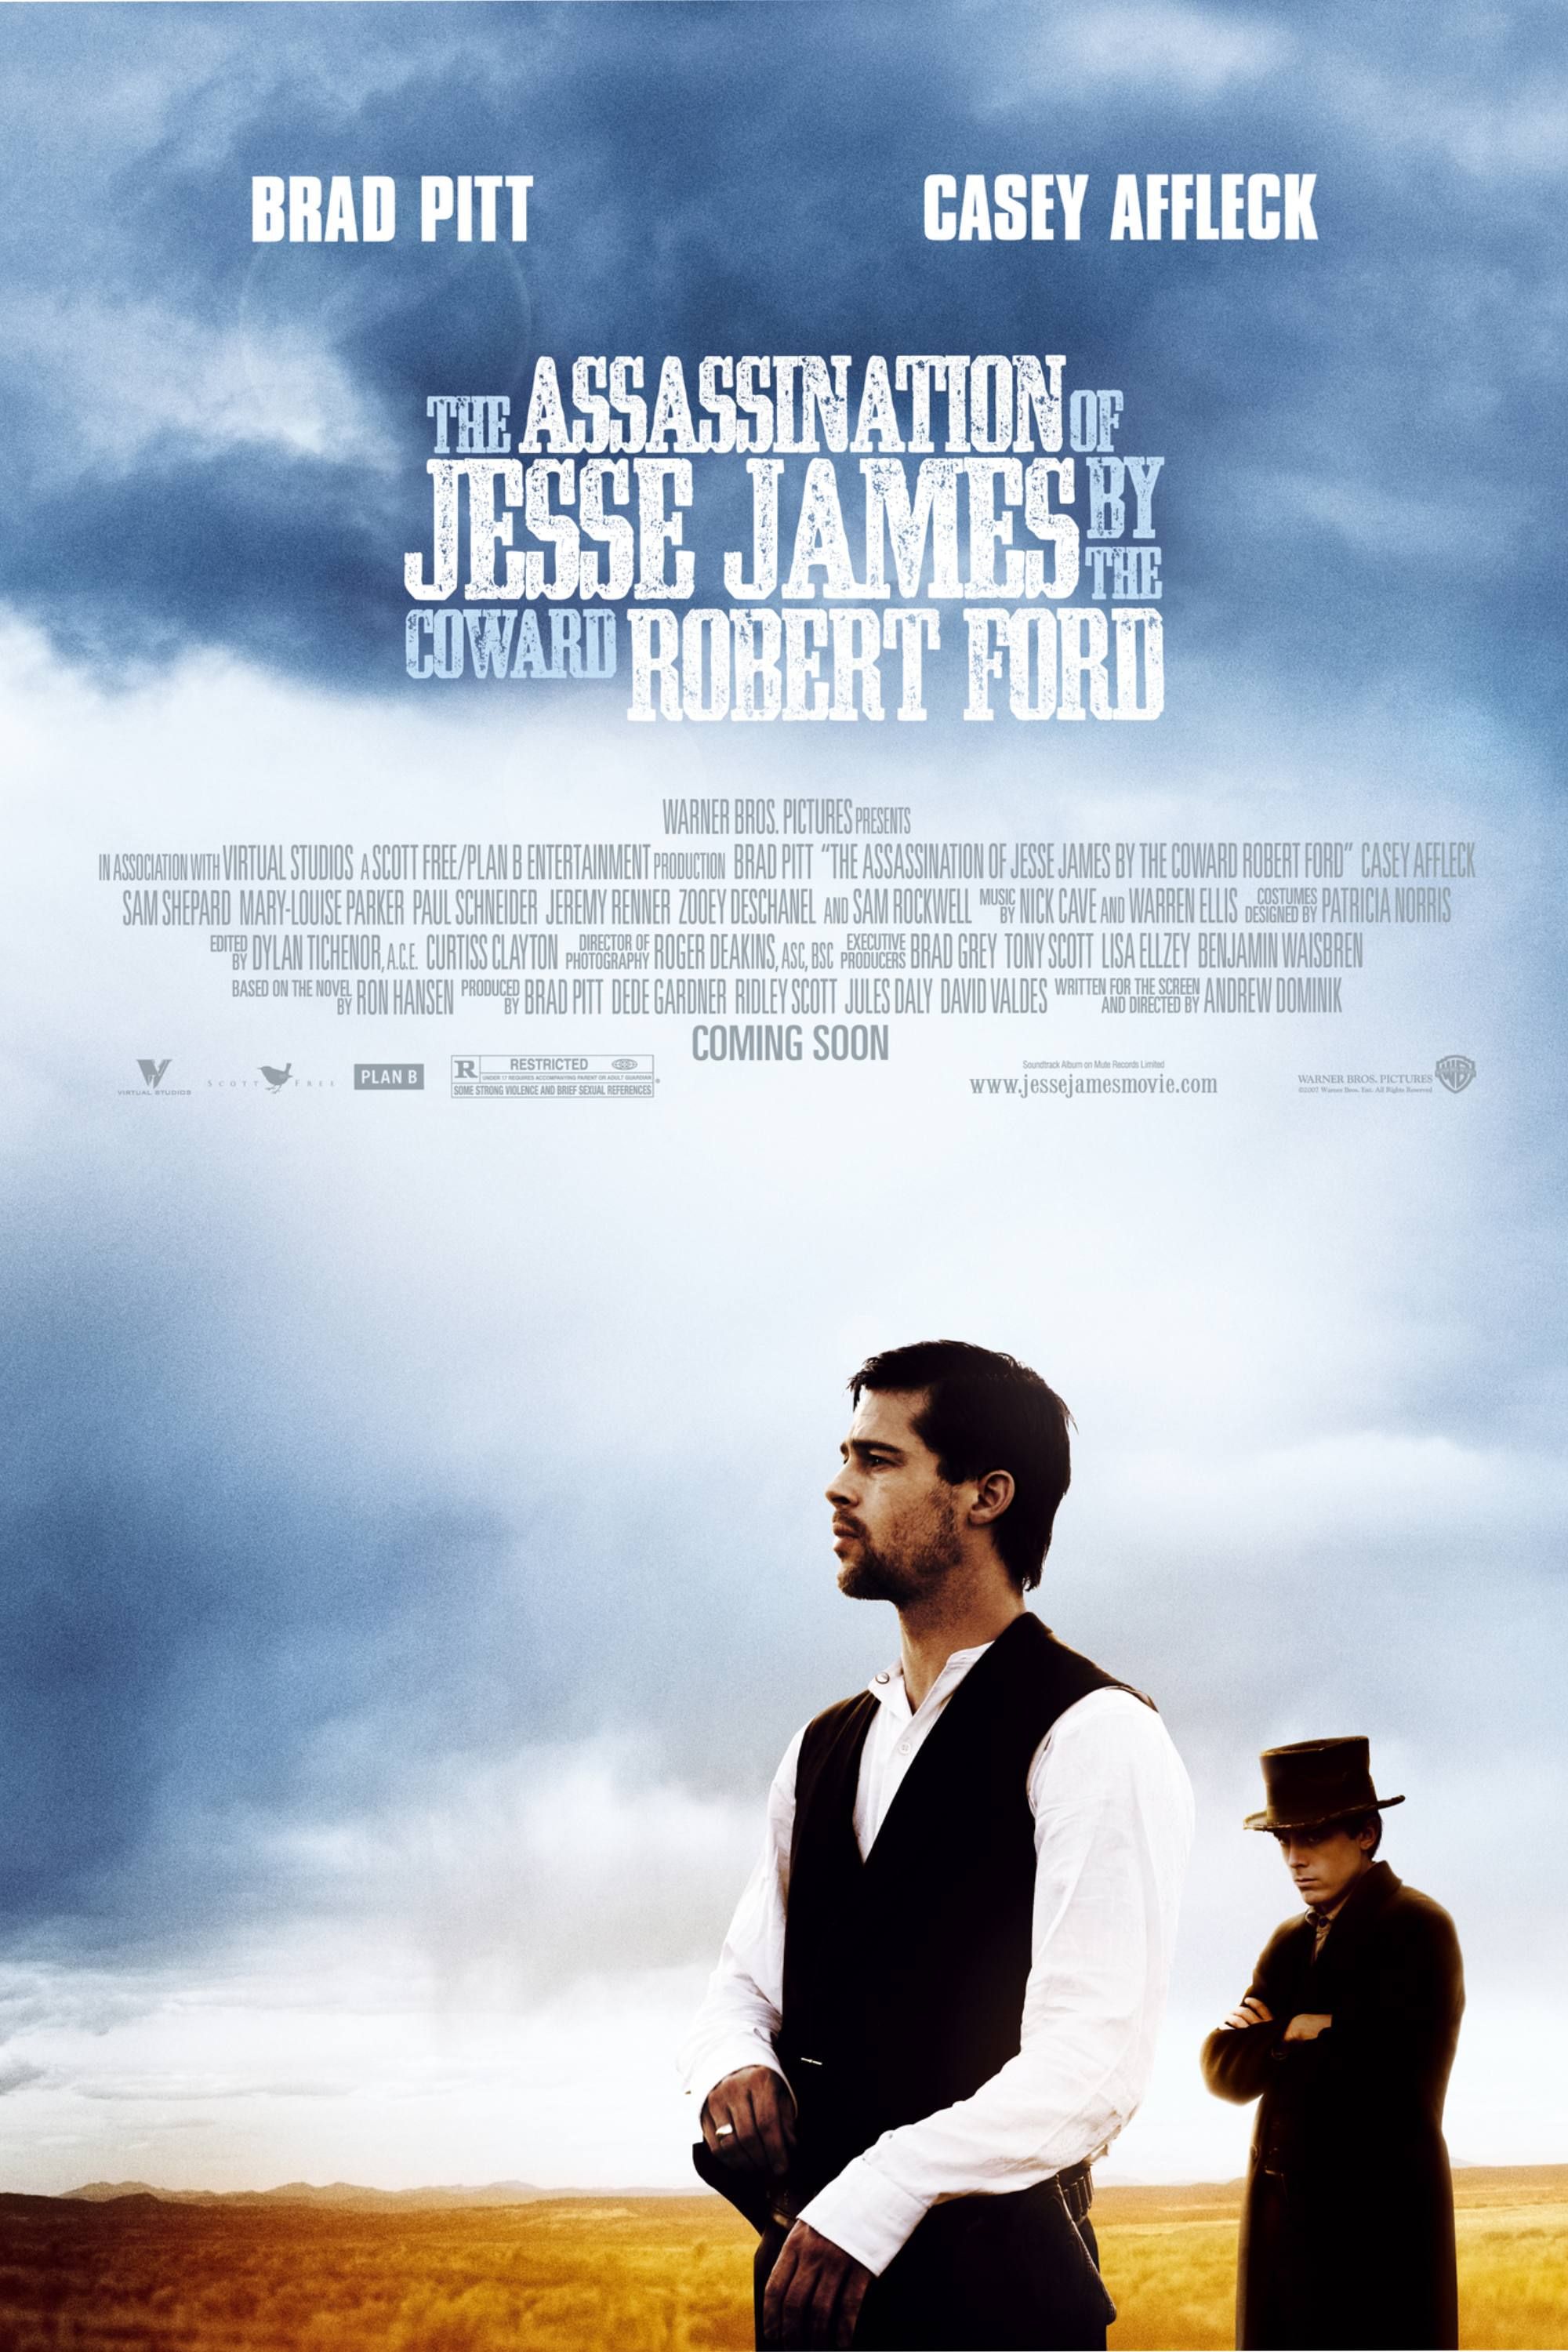 The Assassination of Jesse James by the Coward Robert Ford - Poster